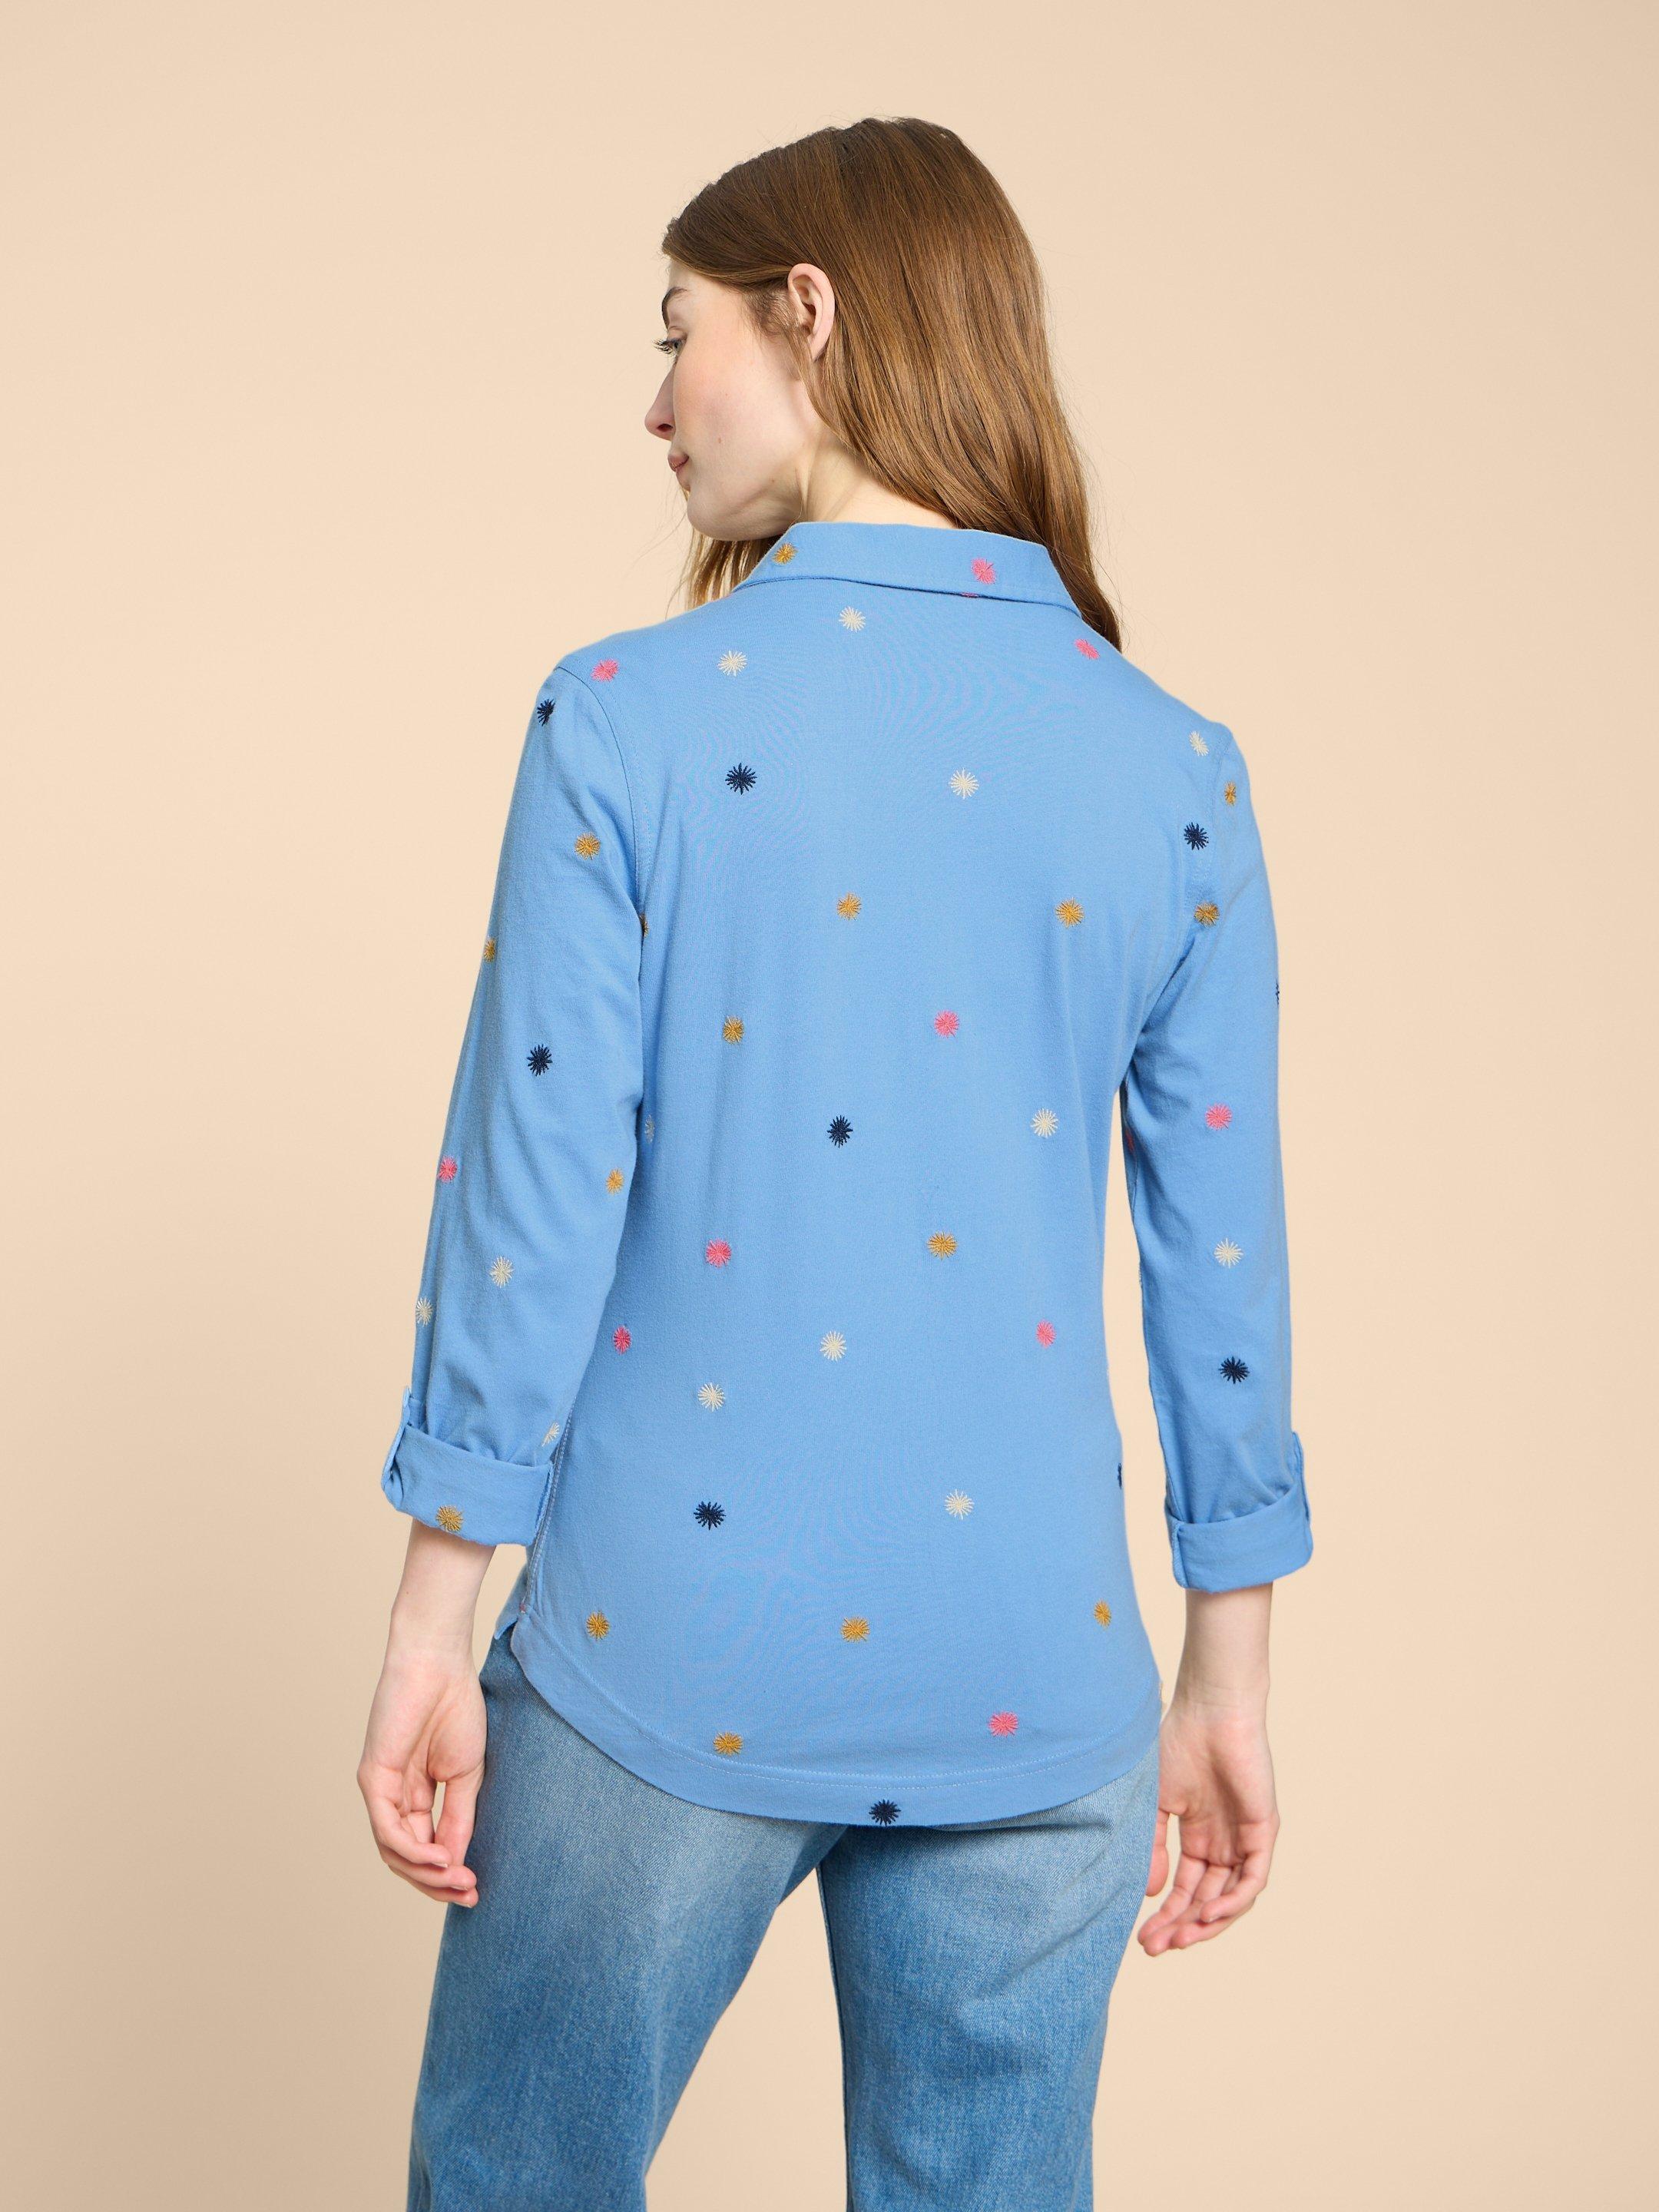 ANNIE JERSEY EMBROIDERED SHIRT in BLUE MLT - MODEL BACK